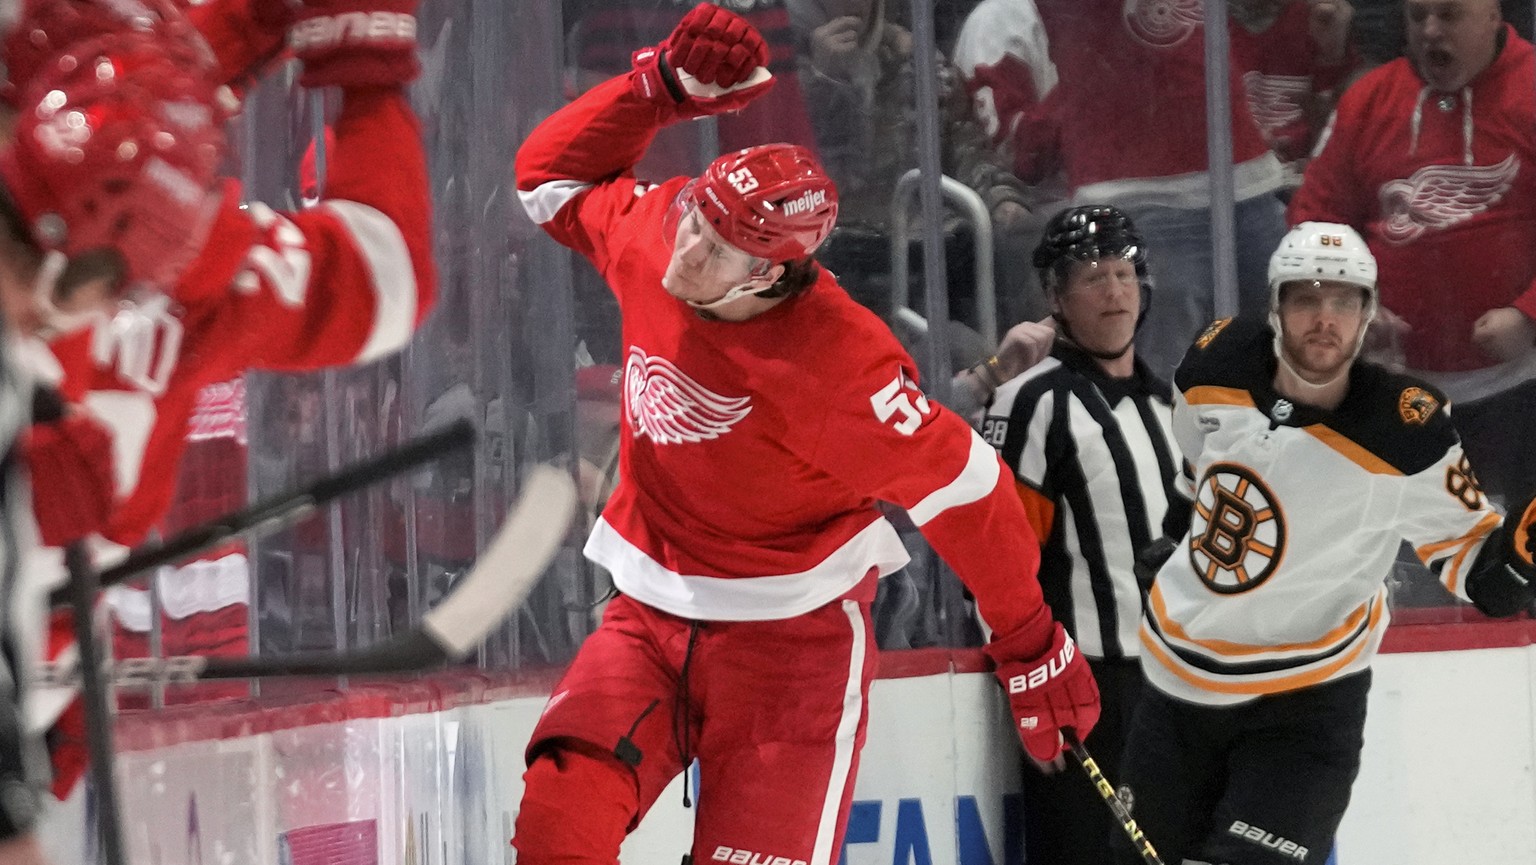 Detroit Red Wings defenseman Moritz Seider (53) celebrates his goal against the Boston Bruins in the second period of an NHL hockey game Sunday, March 12, 2023, in Detroit. (AP Photo/Paul Sancya)